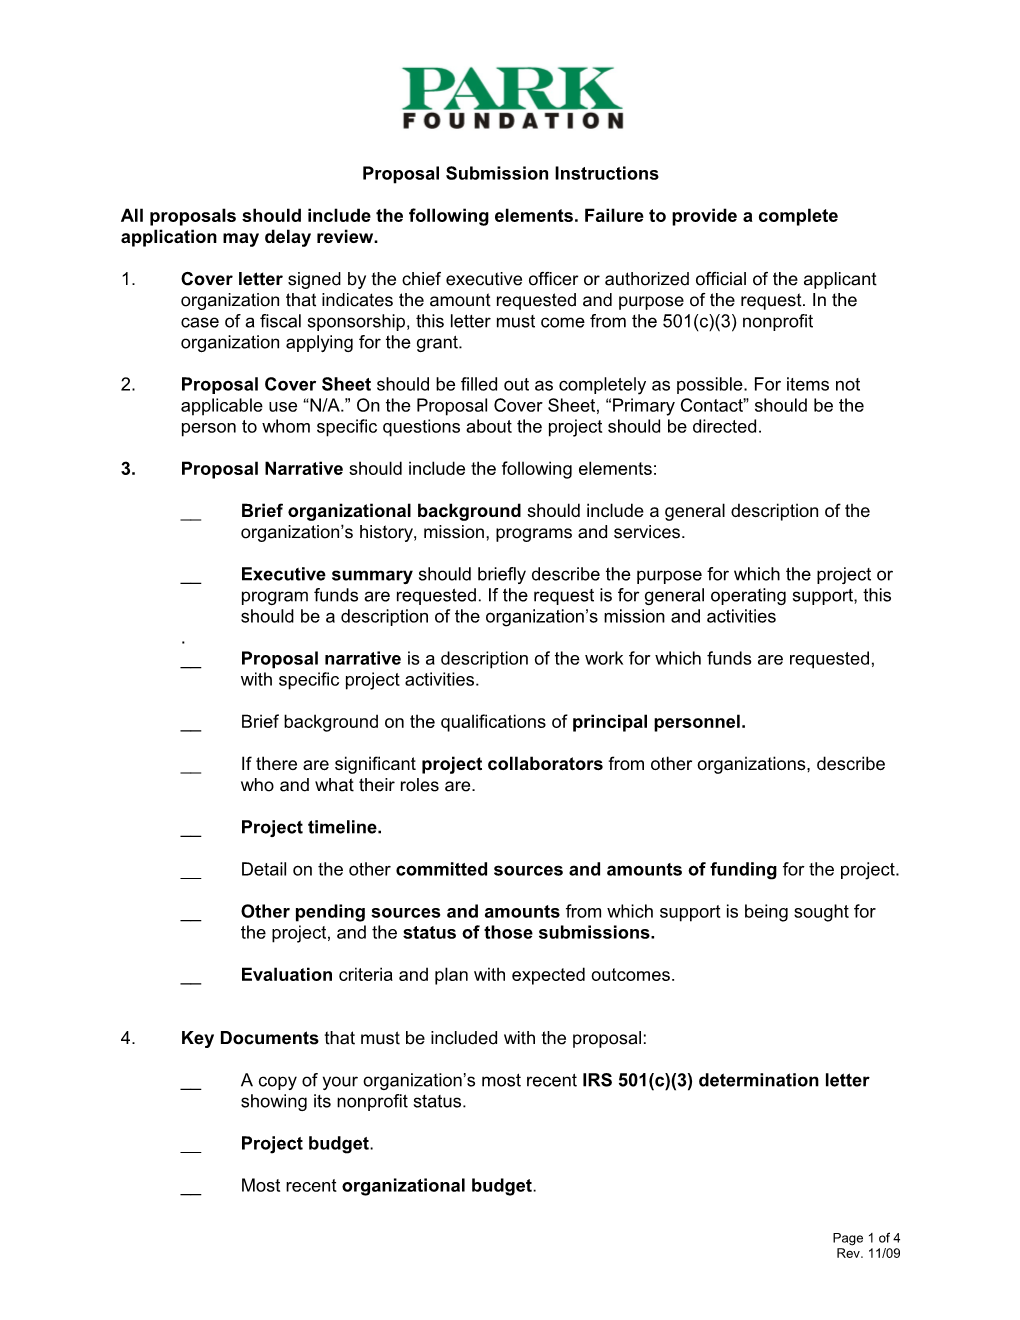 Proposal Submission Instructions s1